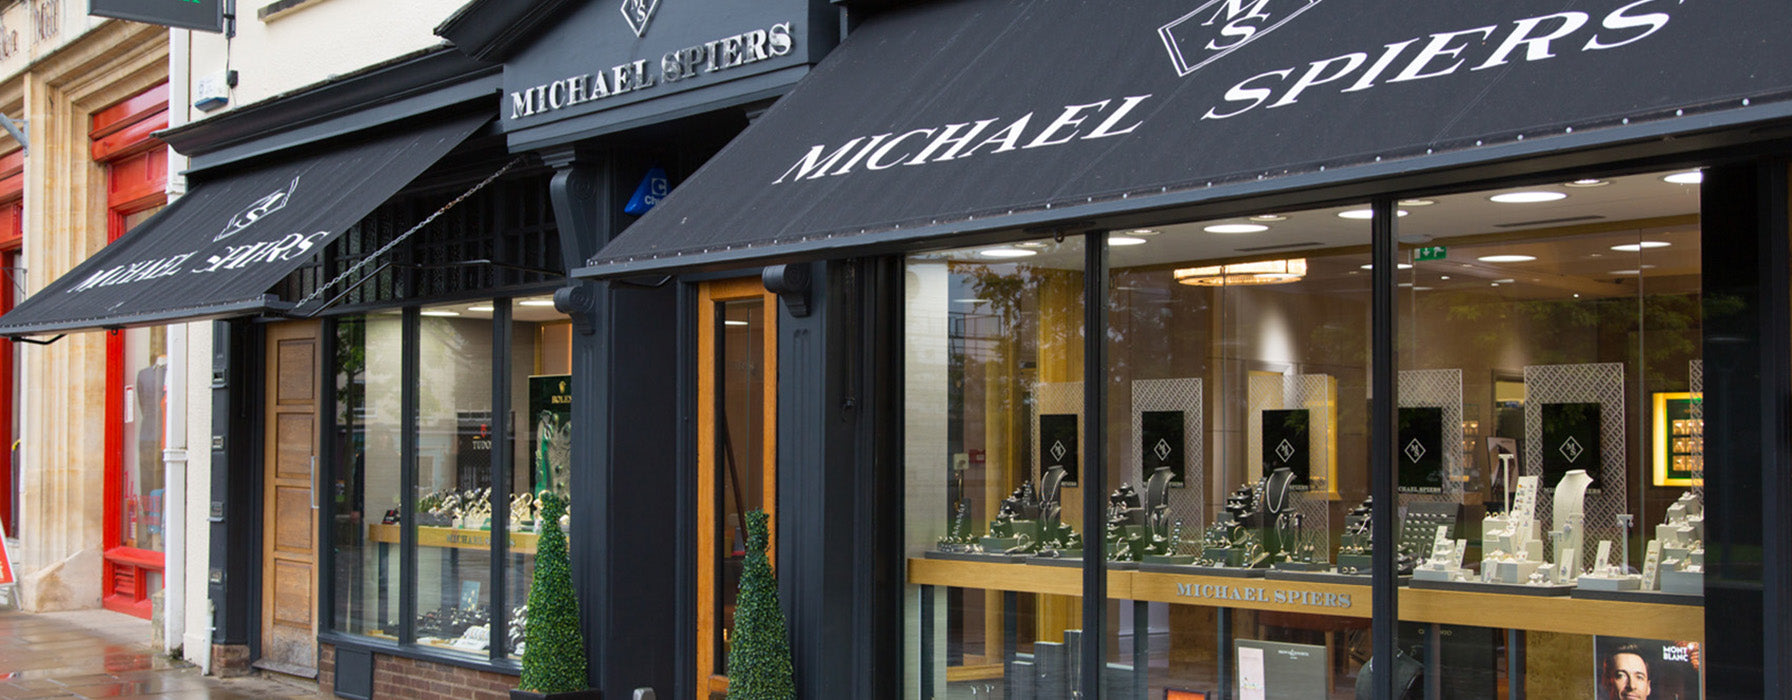 A black awning on Michael Spiers jewellers Exeter storefront in Exeter city centre on Cathedral Green. Exquisite jewellery brands are on display including necklaces, rings, earrings, bracelets and fine watches from Omega, Tag Heuer, Gucci, Tissot, Fope, Georg Jensen. 